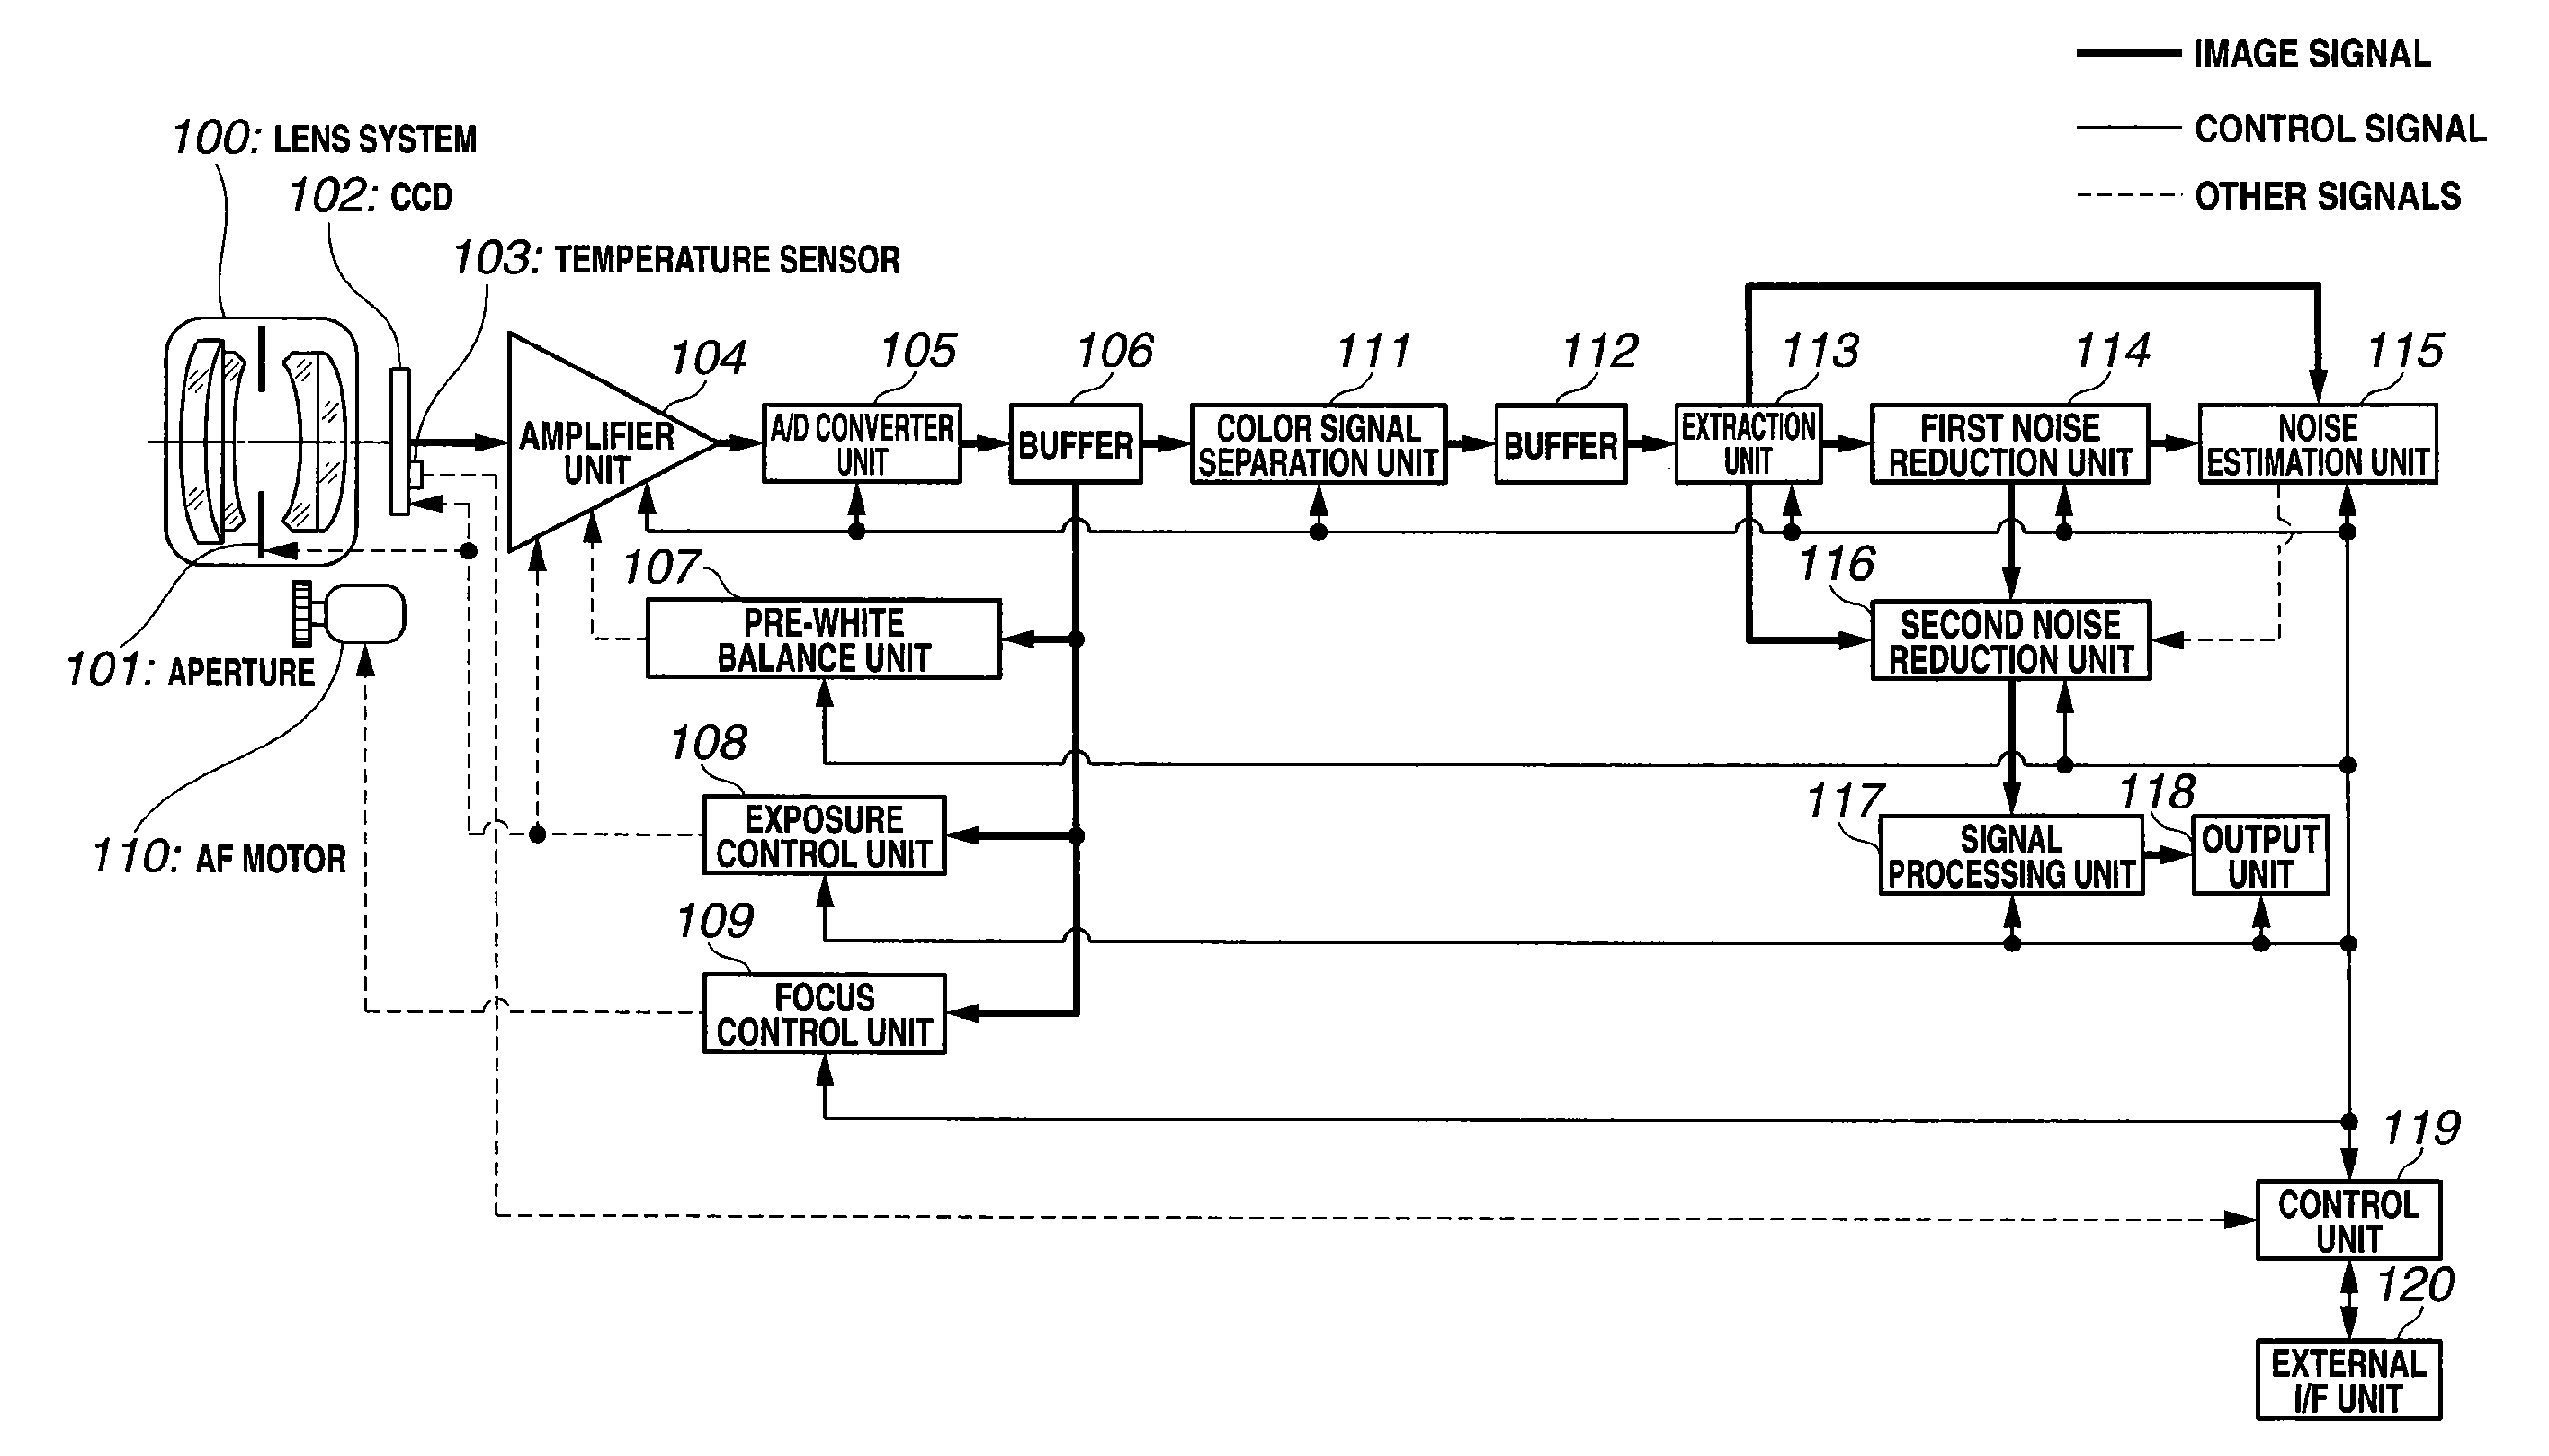 Image capturing system and computer readable recording medium for recording image processing program